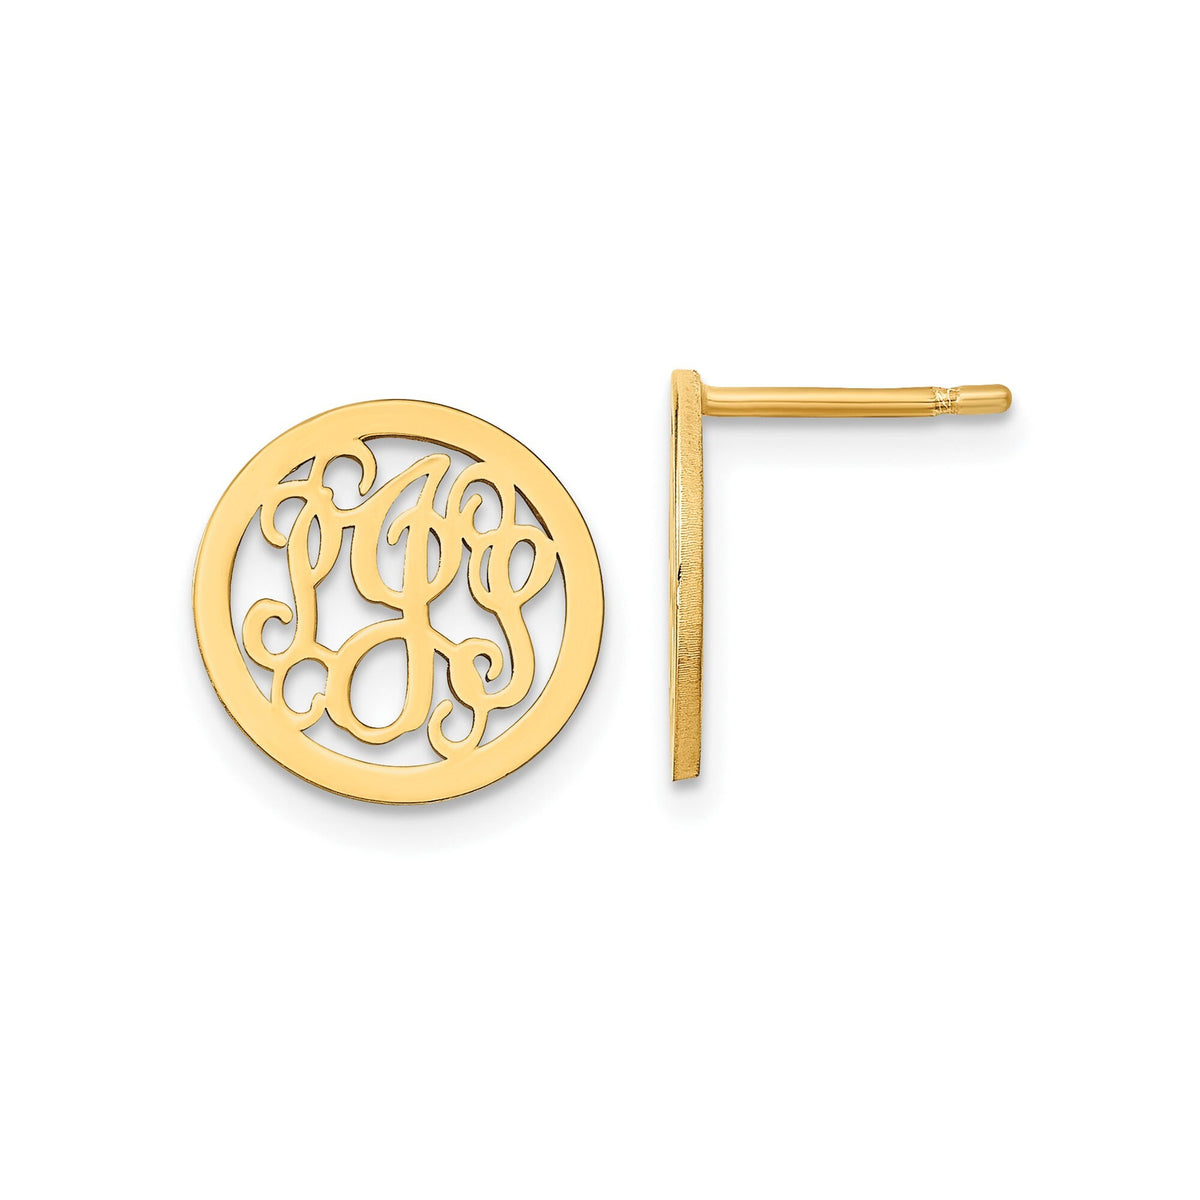 Personalized Monogram Circle Post Earrings Available in Sterling Silver Gold Plated Silver & 14k Gold - Gift Box Included Made in USA